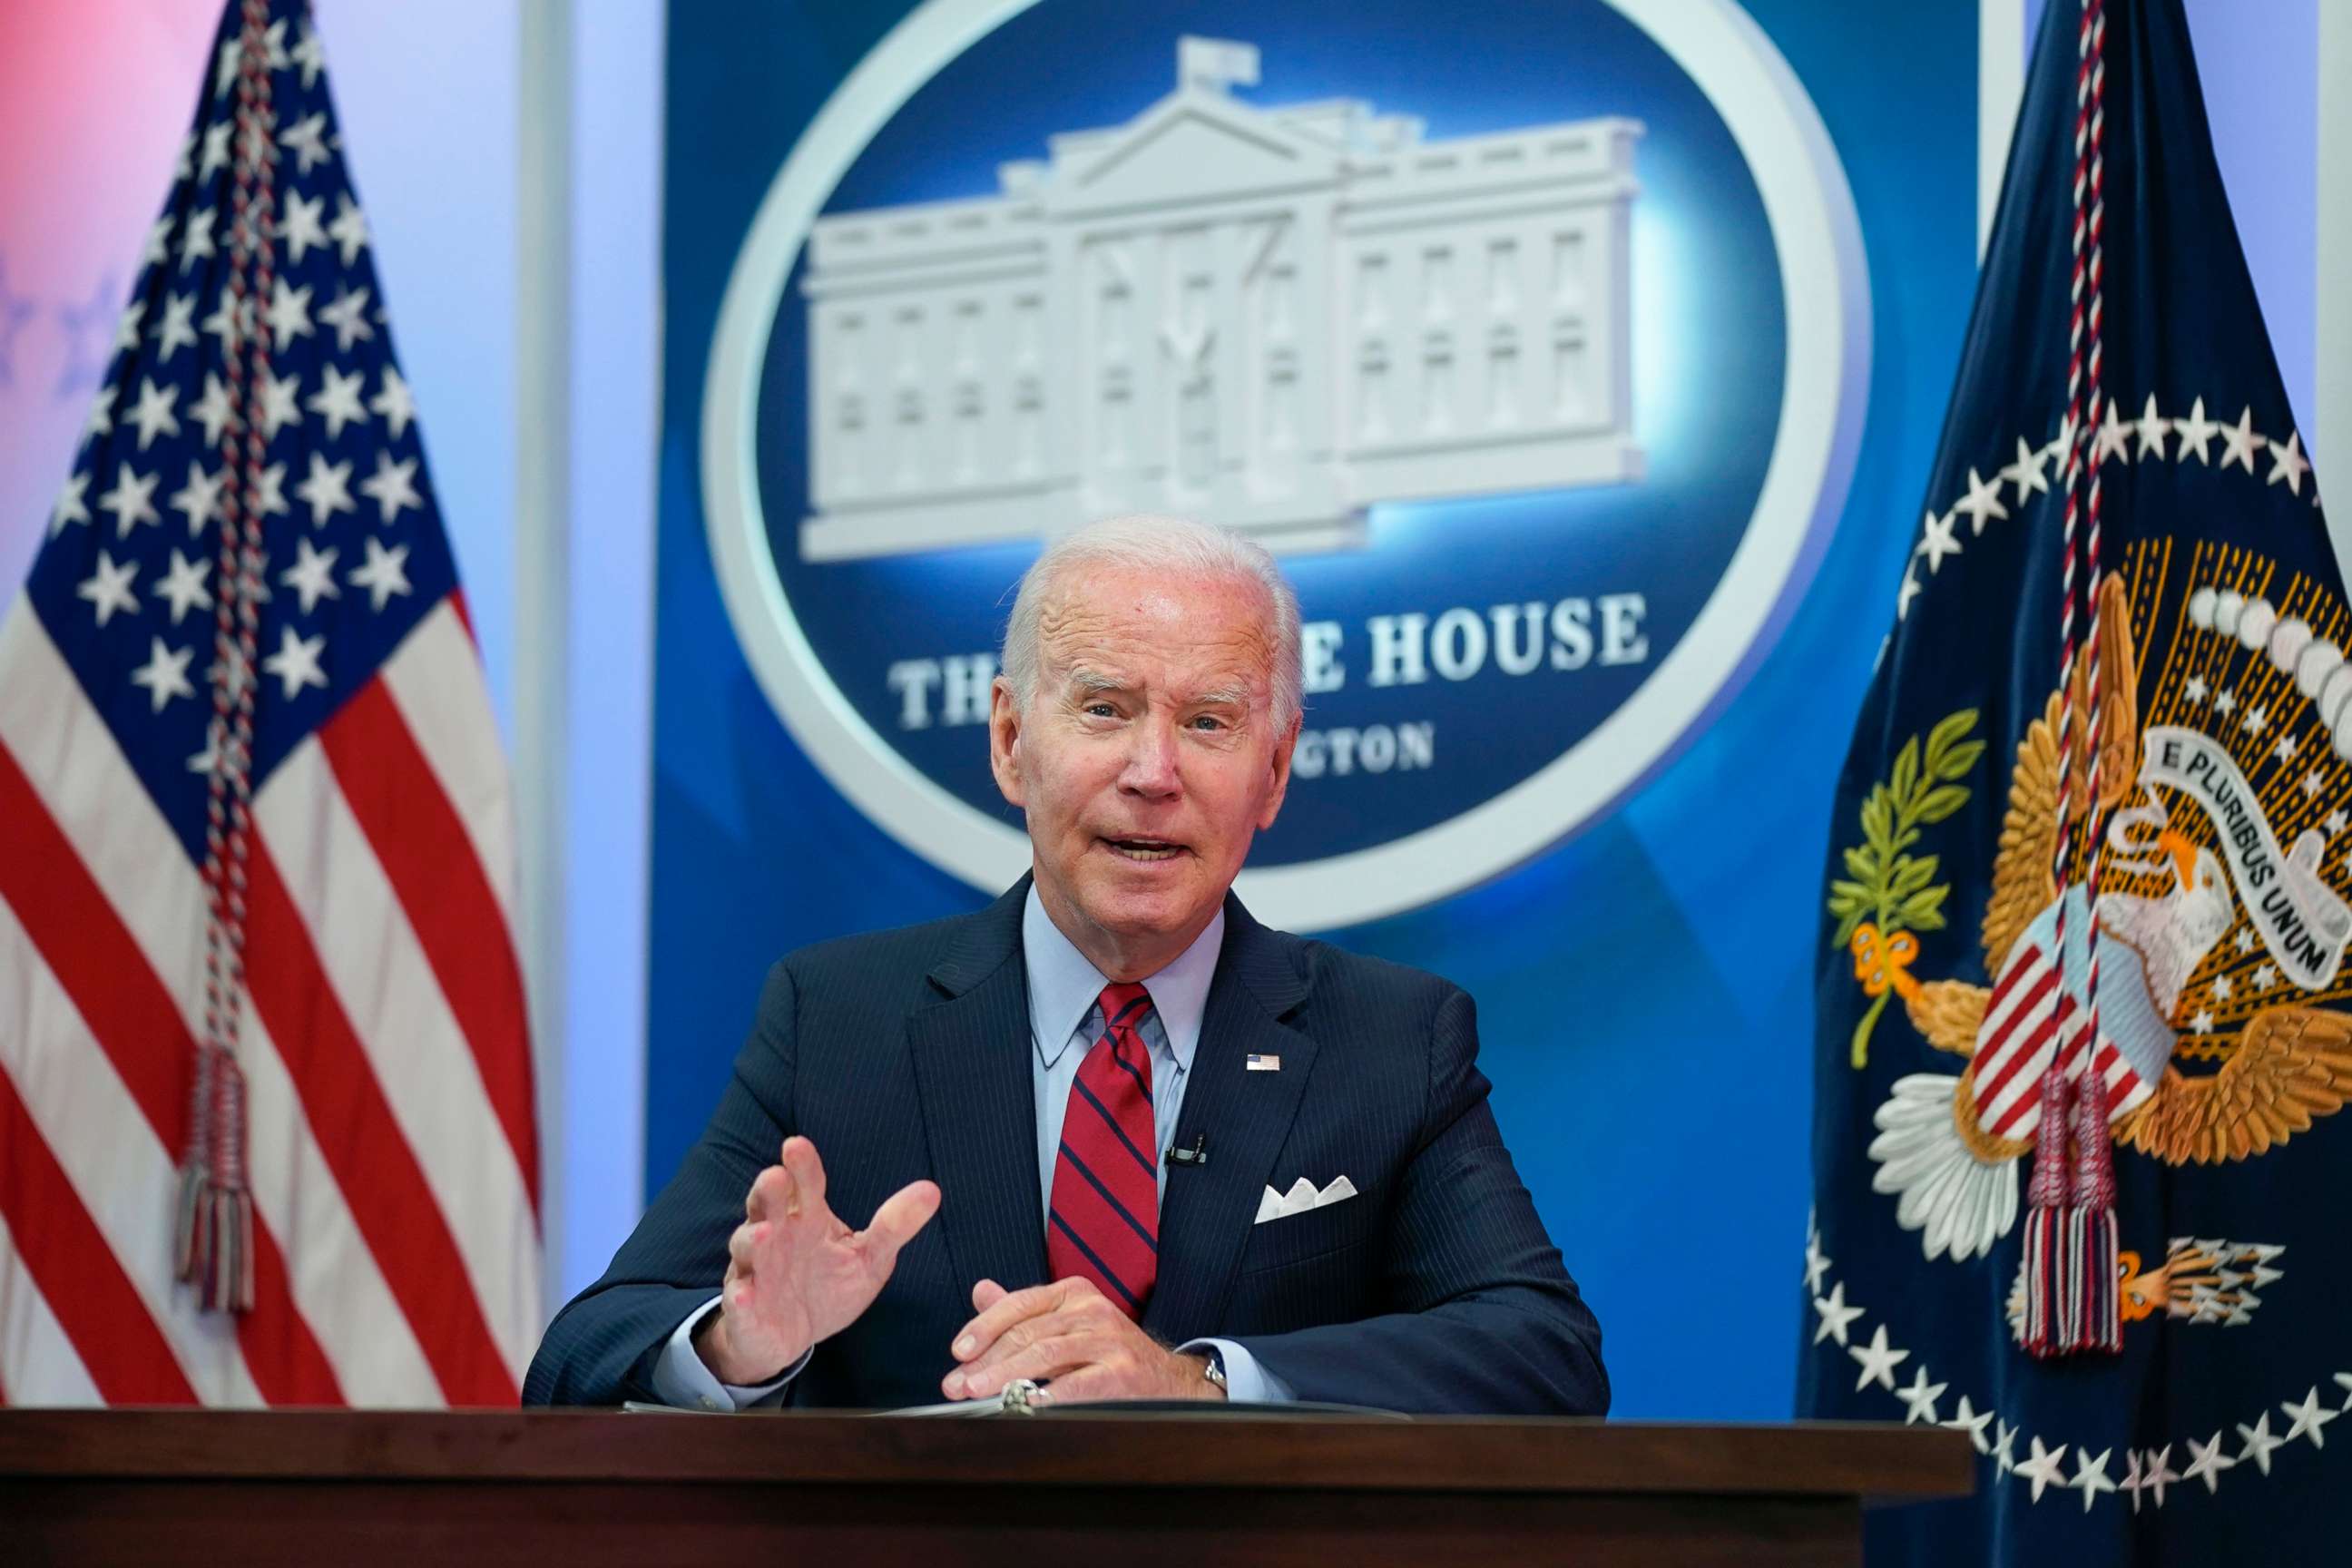 PHOTO: President Joe Biden speaks during a virtual meeting with Democratic governors on the issue of abortion rights, in the South Court Auditorium on the White House campus, on July 1, 2022, in Washington, D.C.